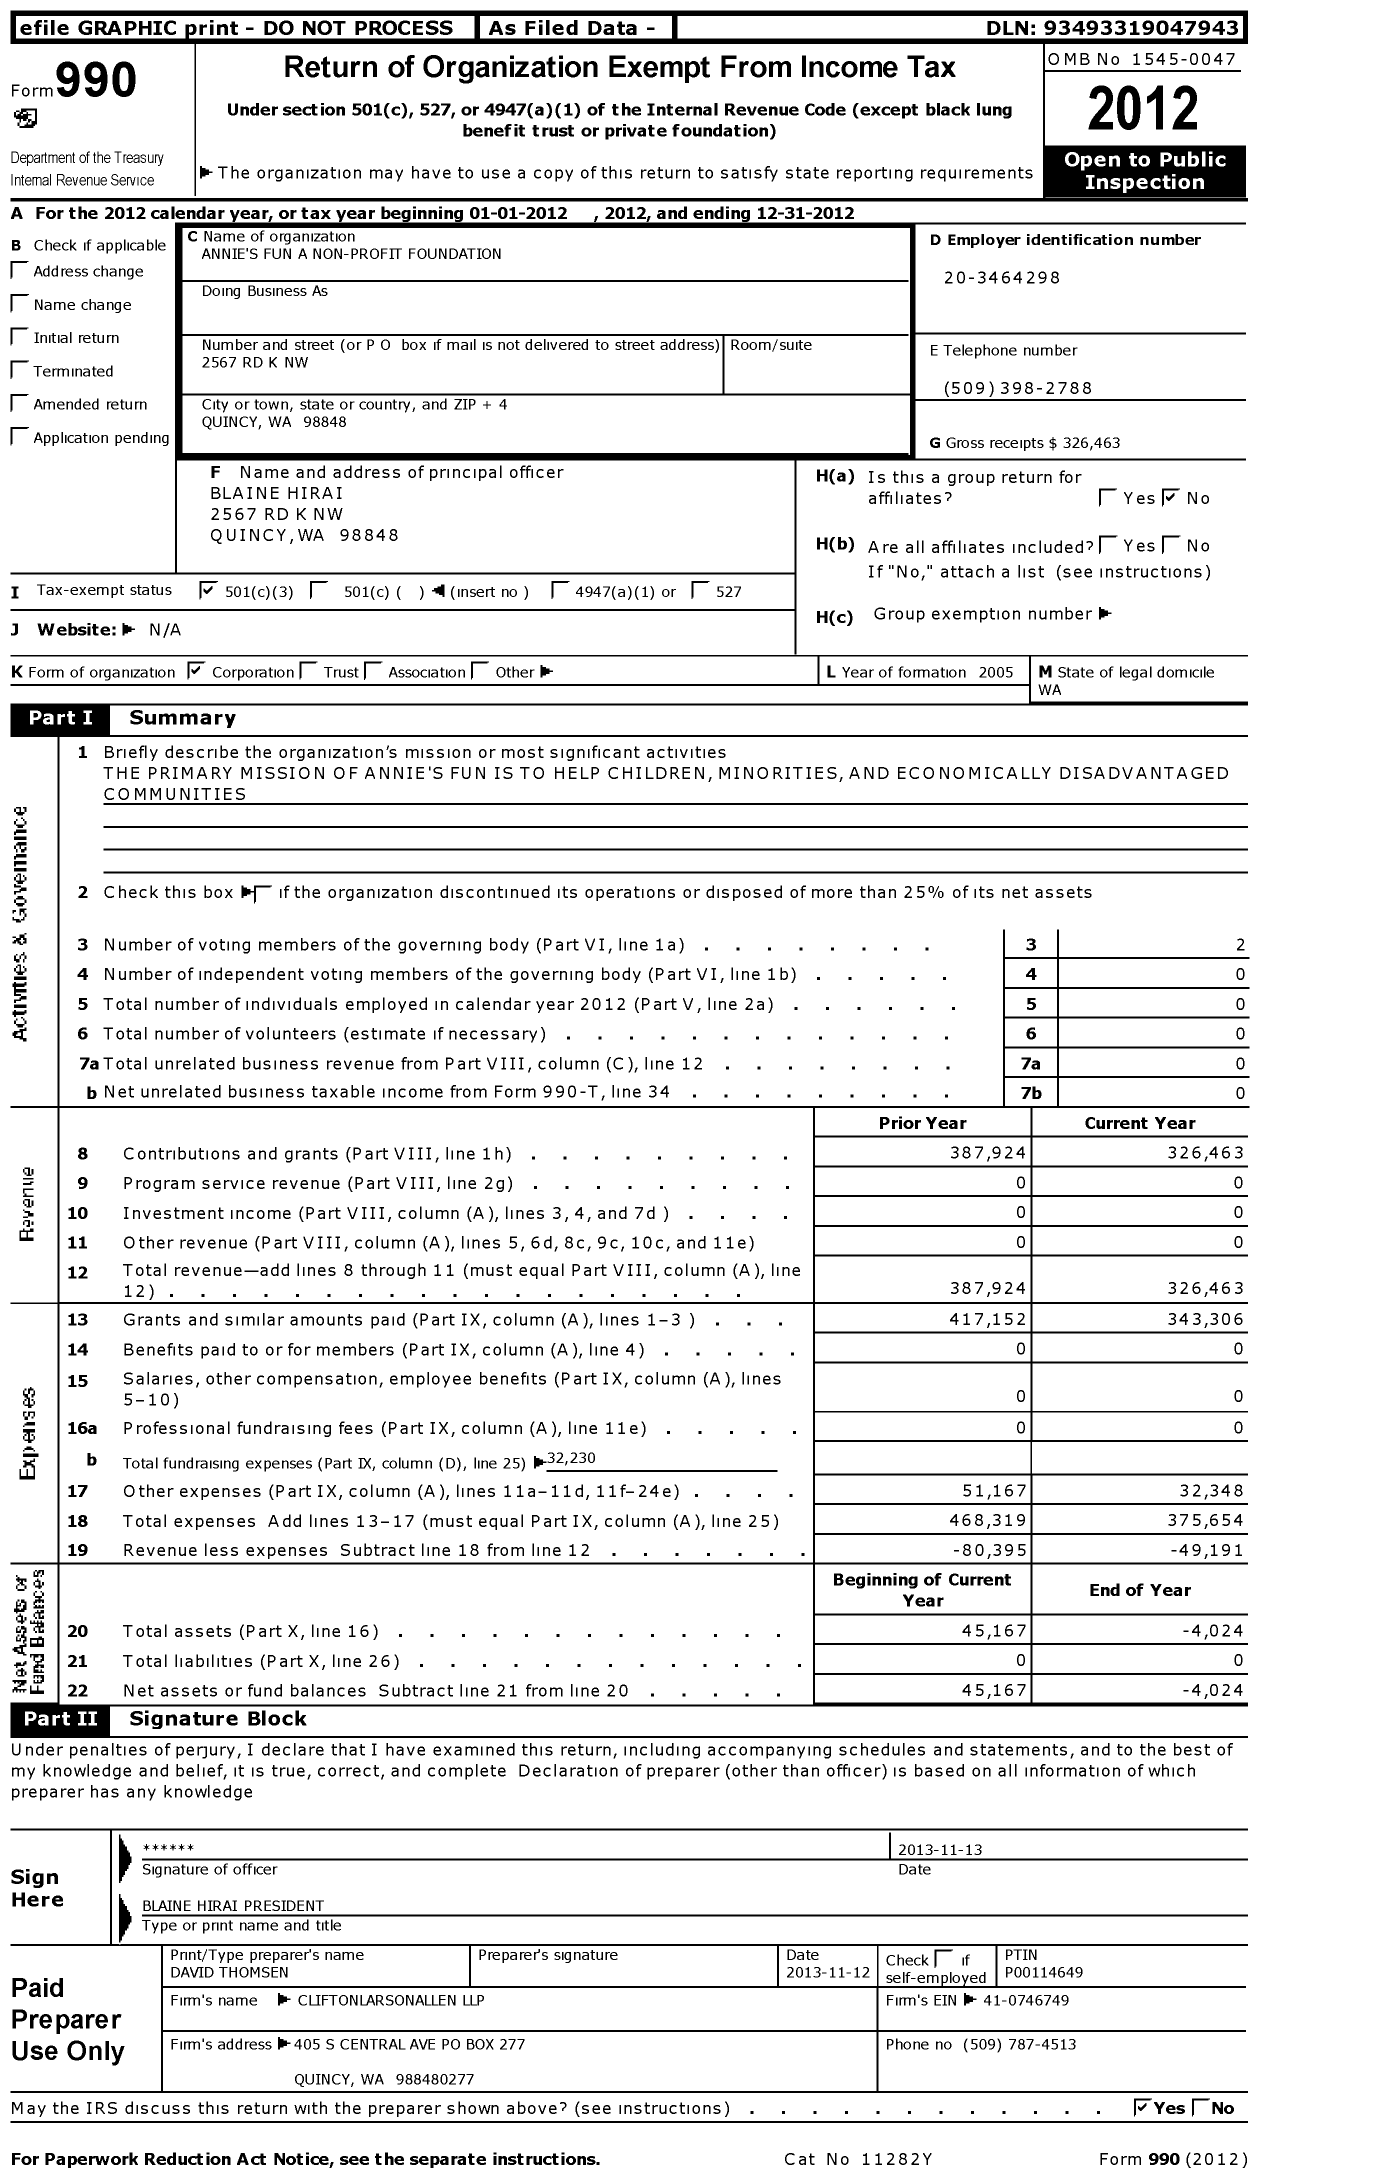 Image of first page of 2012 Form 990 for Annie's Fun A Non-Profit Foundation